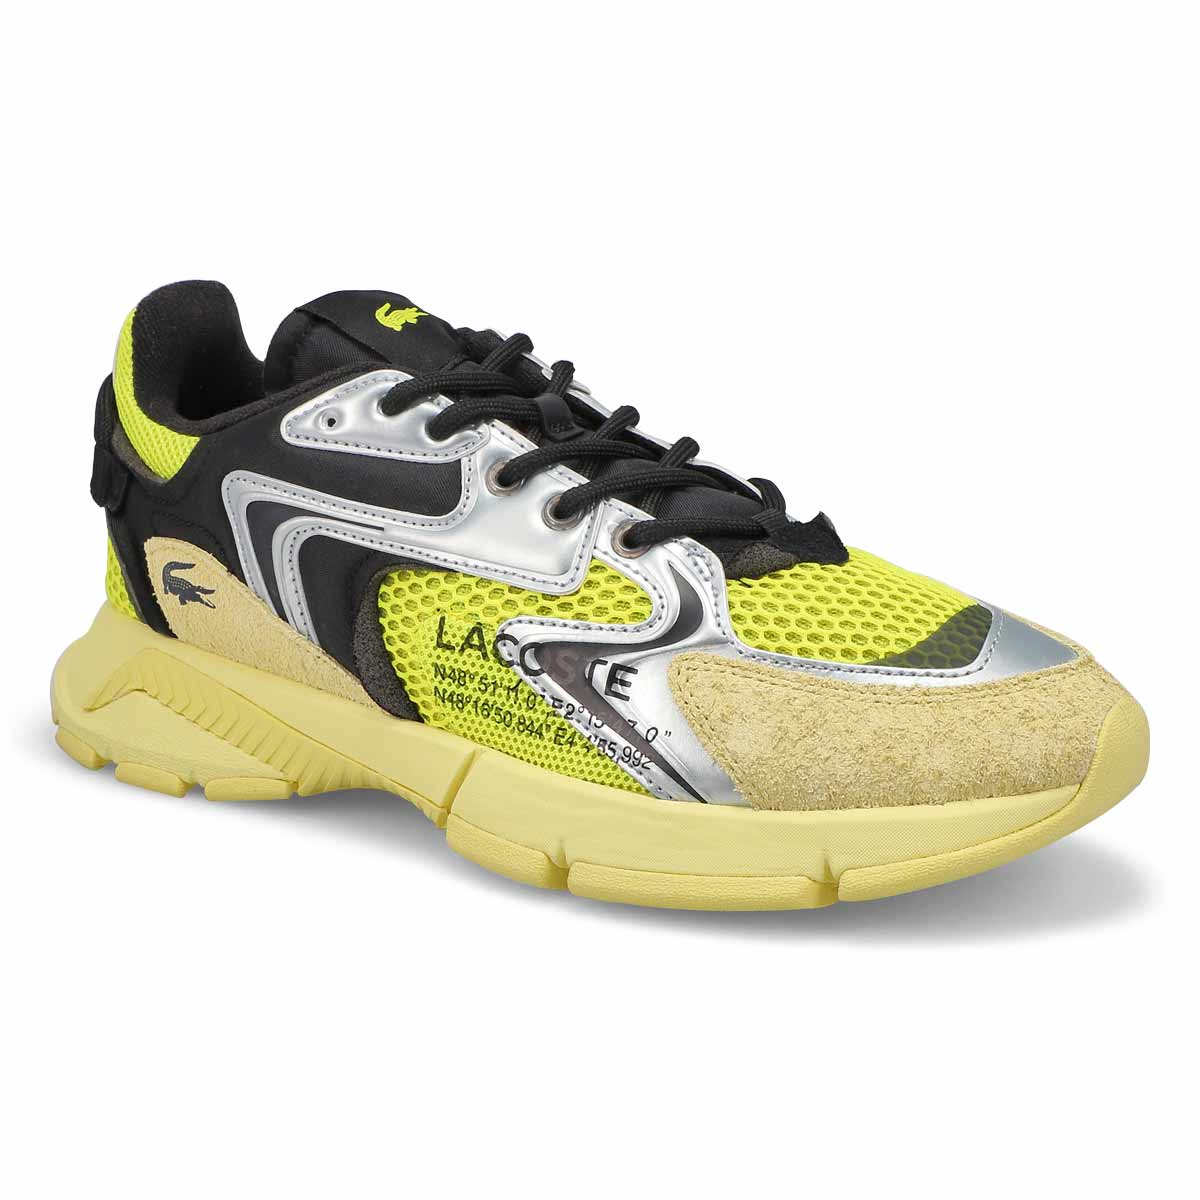 Baskets L003 NEO CONTRASTED, jaune/blanc, hommes